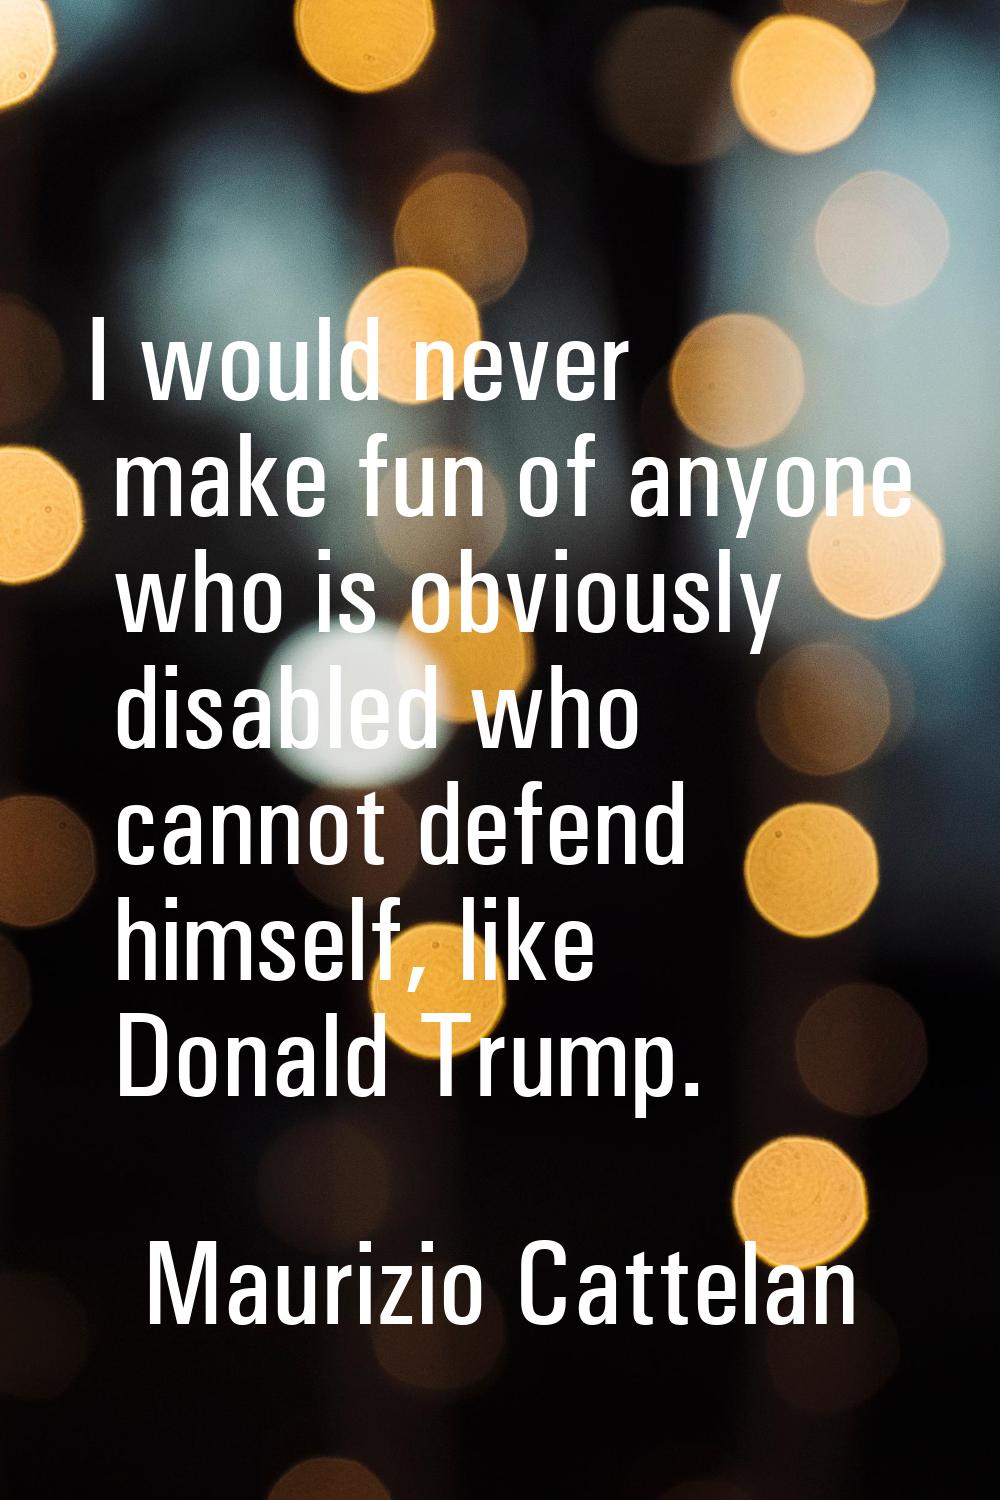 I would never make fun of anyone who is obviously disabled who cannot defend himself, like Donald T